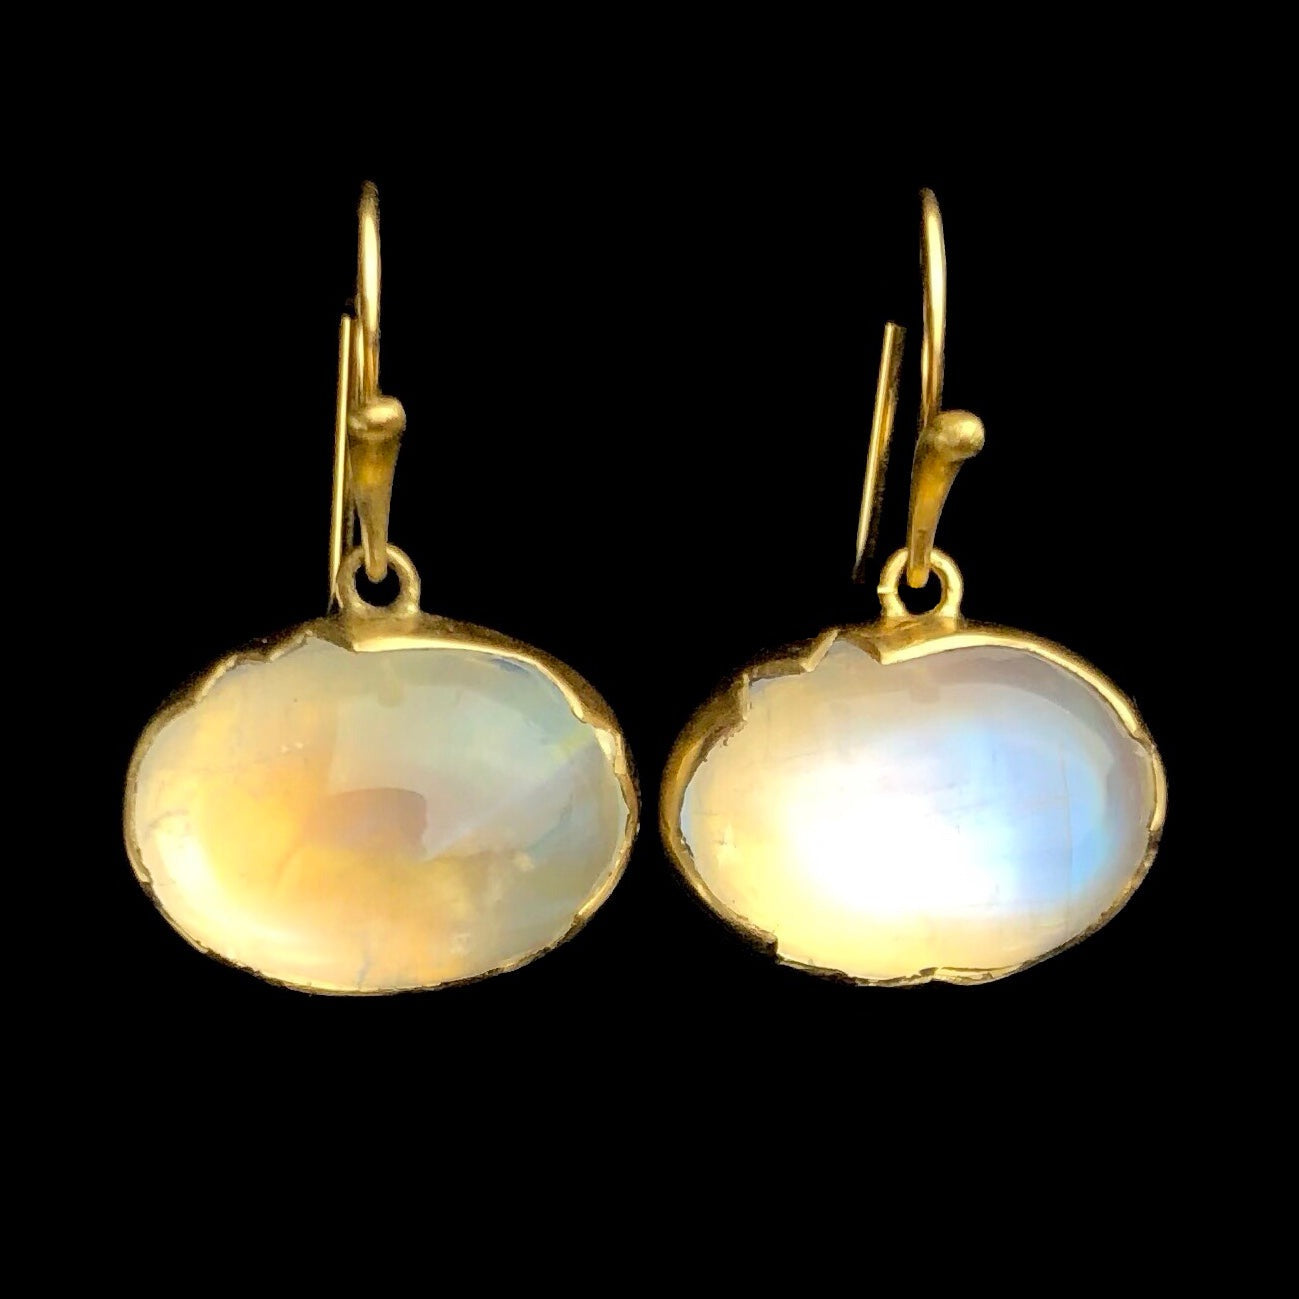 Sideways hanging oval moonstones glowing blue iridescence on gold earring wires 